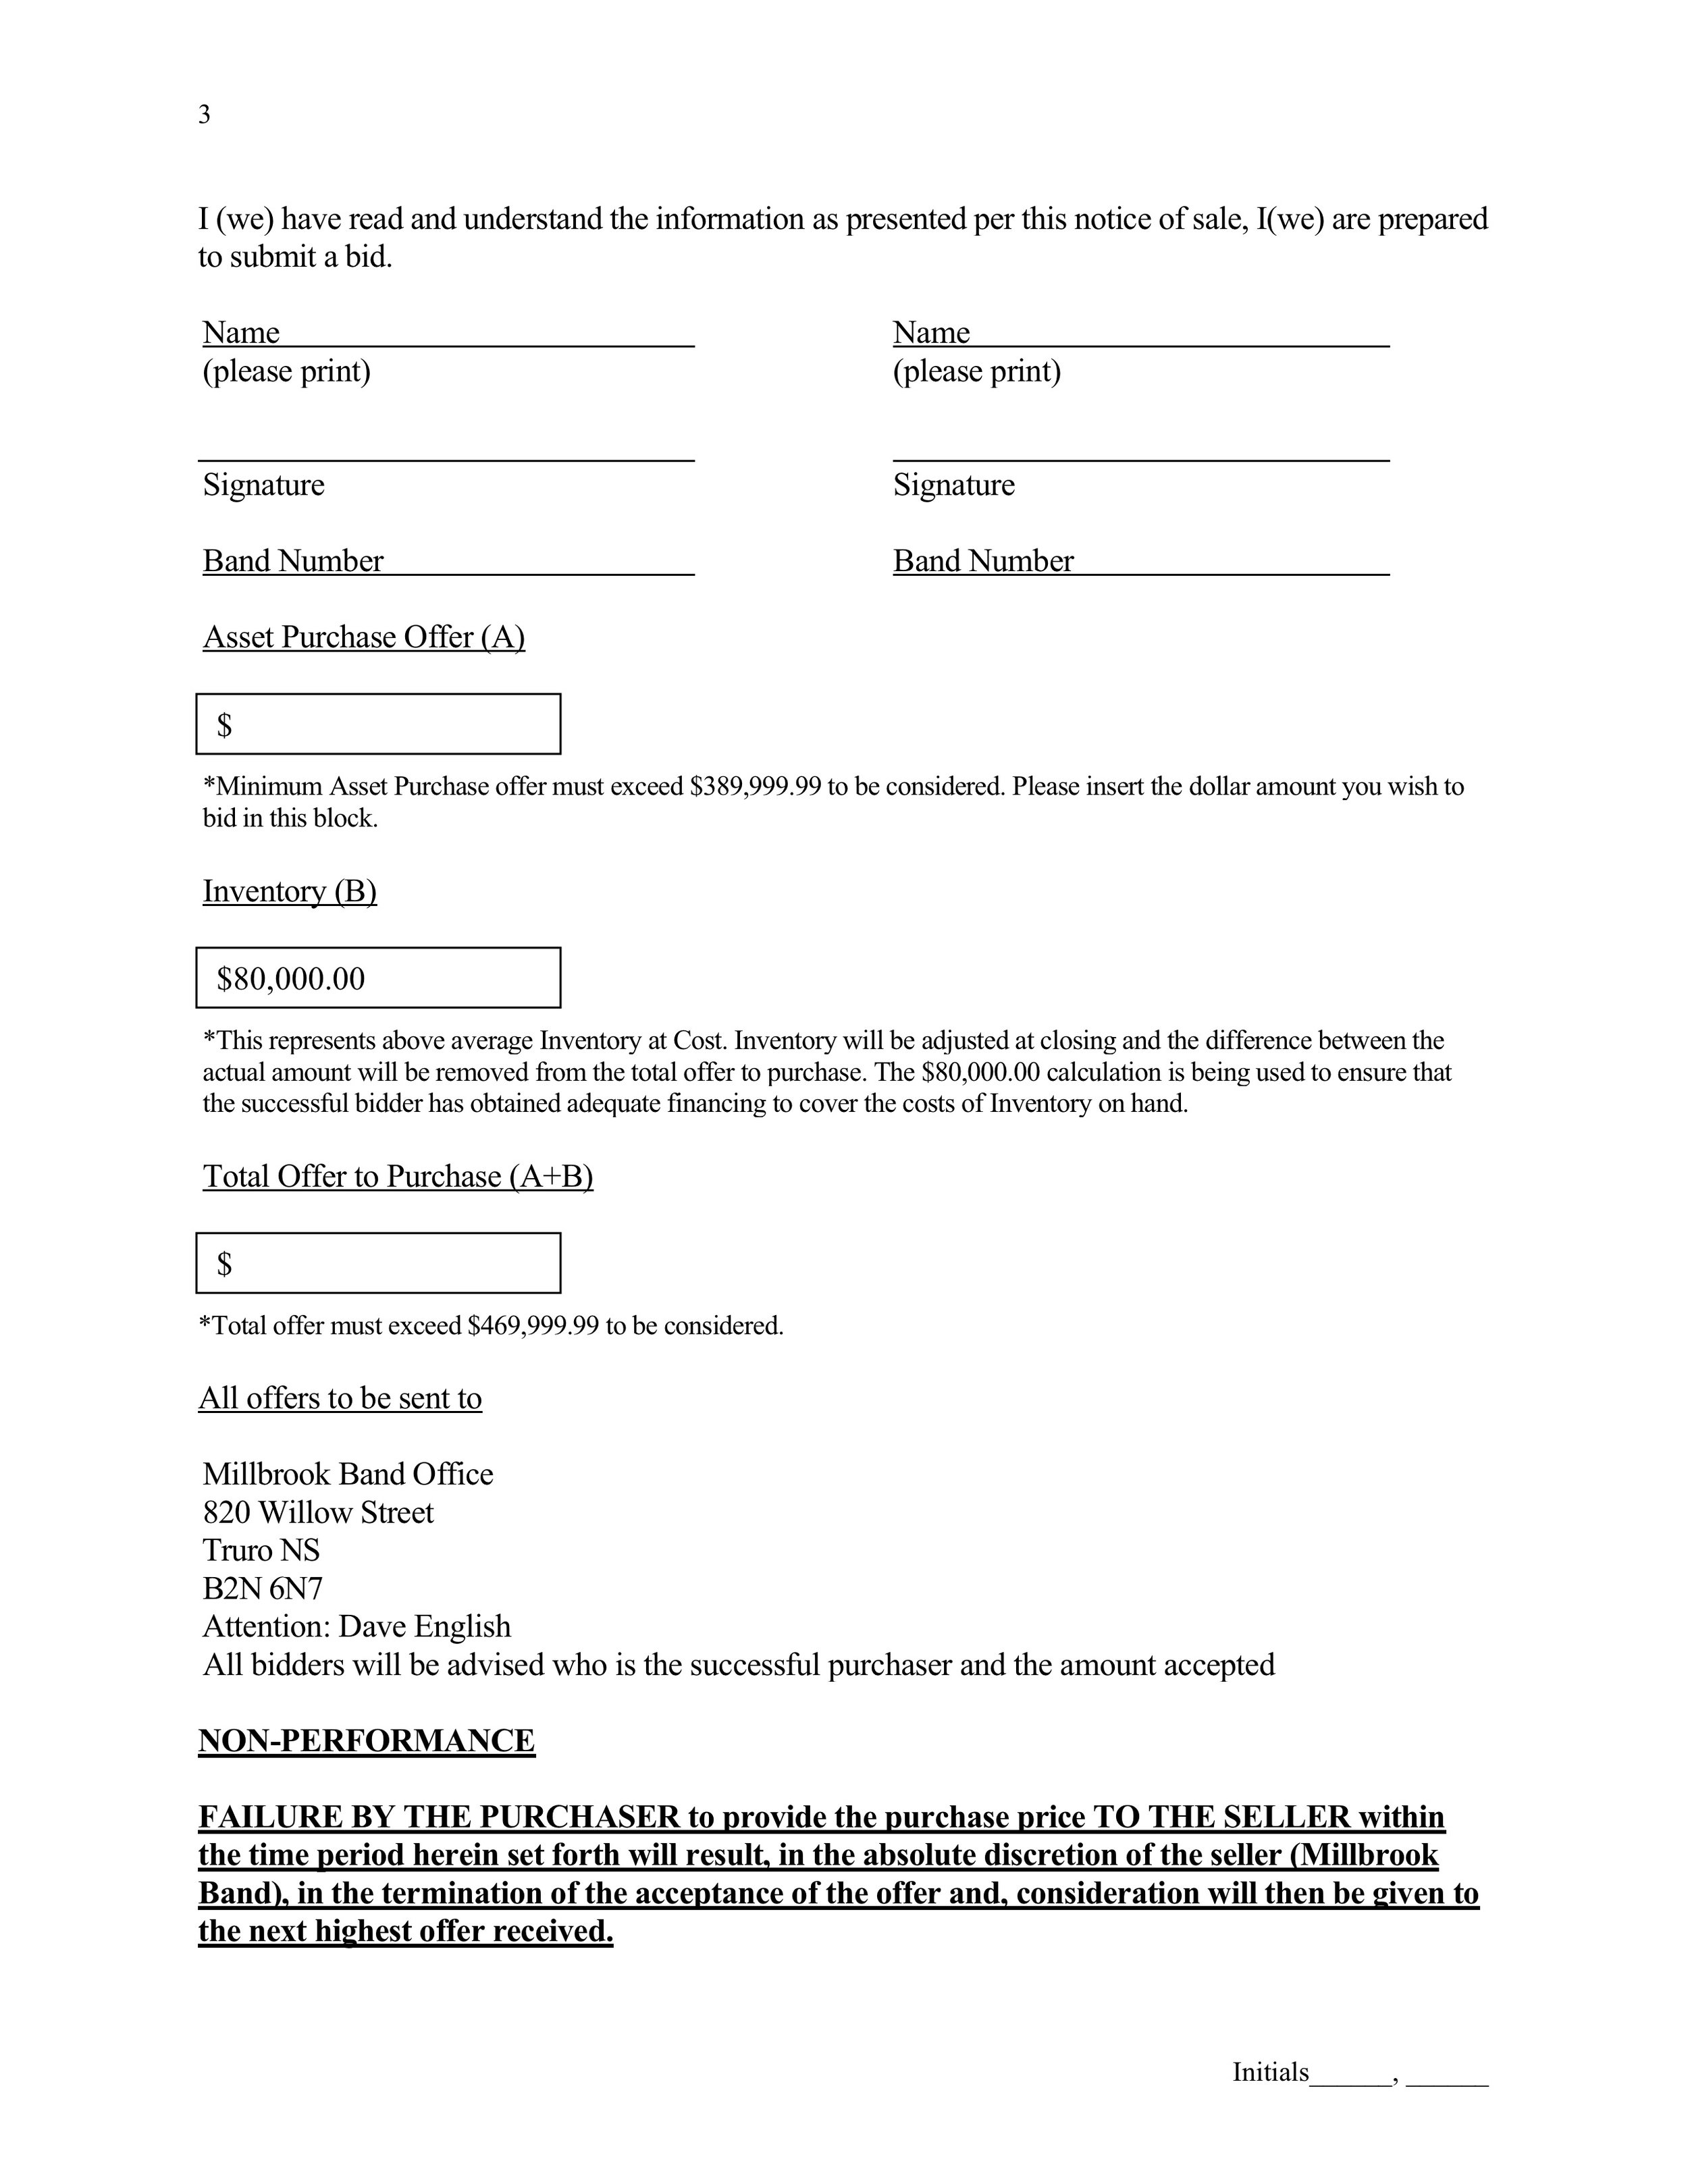 Cole Harbour Gas Bar Asset Purchase Document Revised-1-June 17th 2019 (3)3.jpg